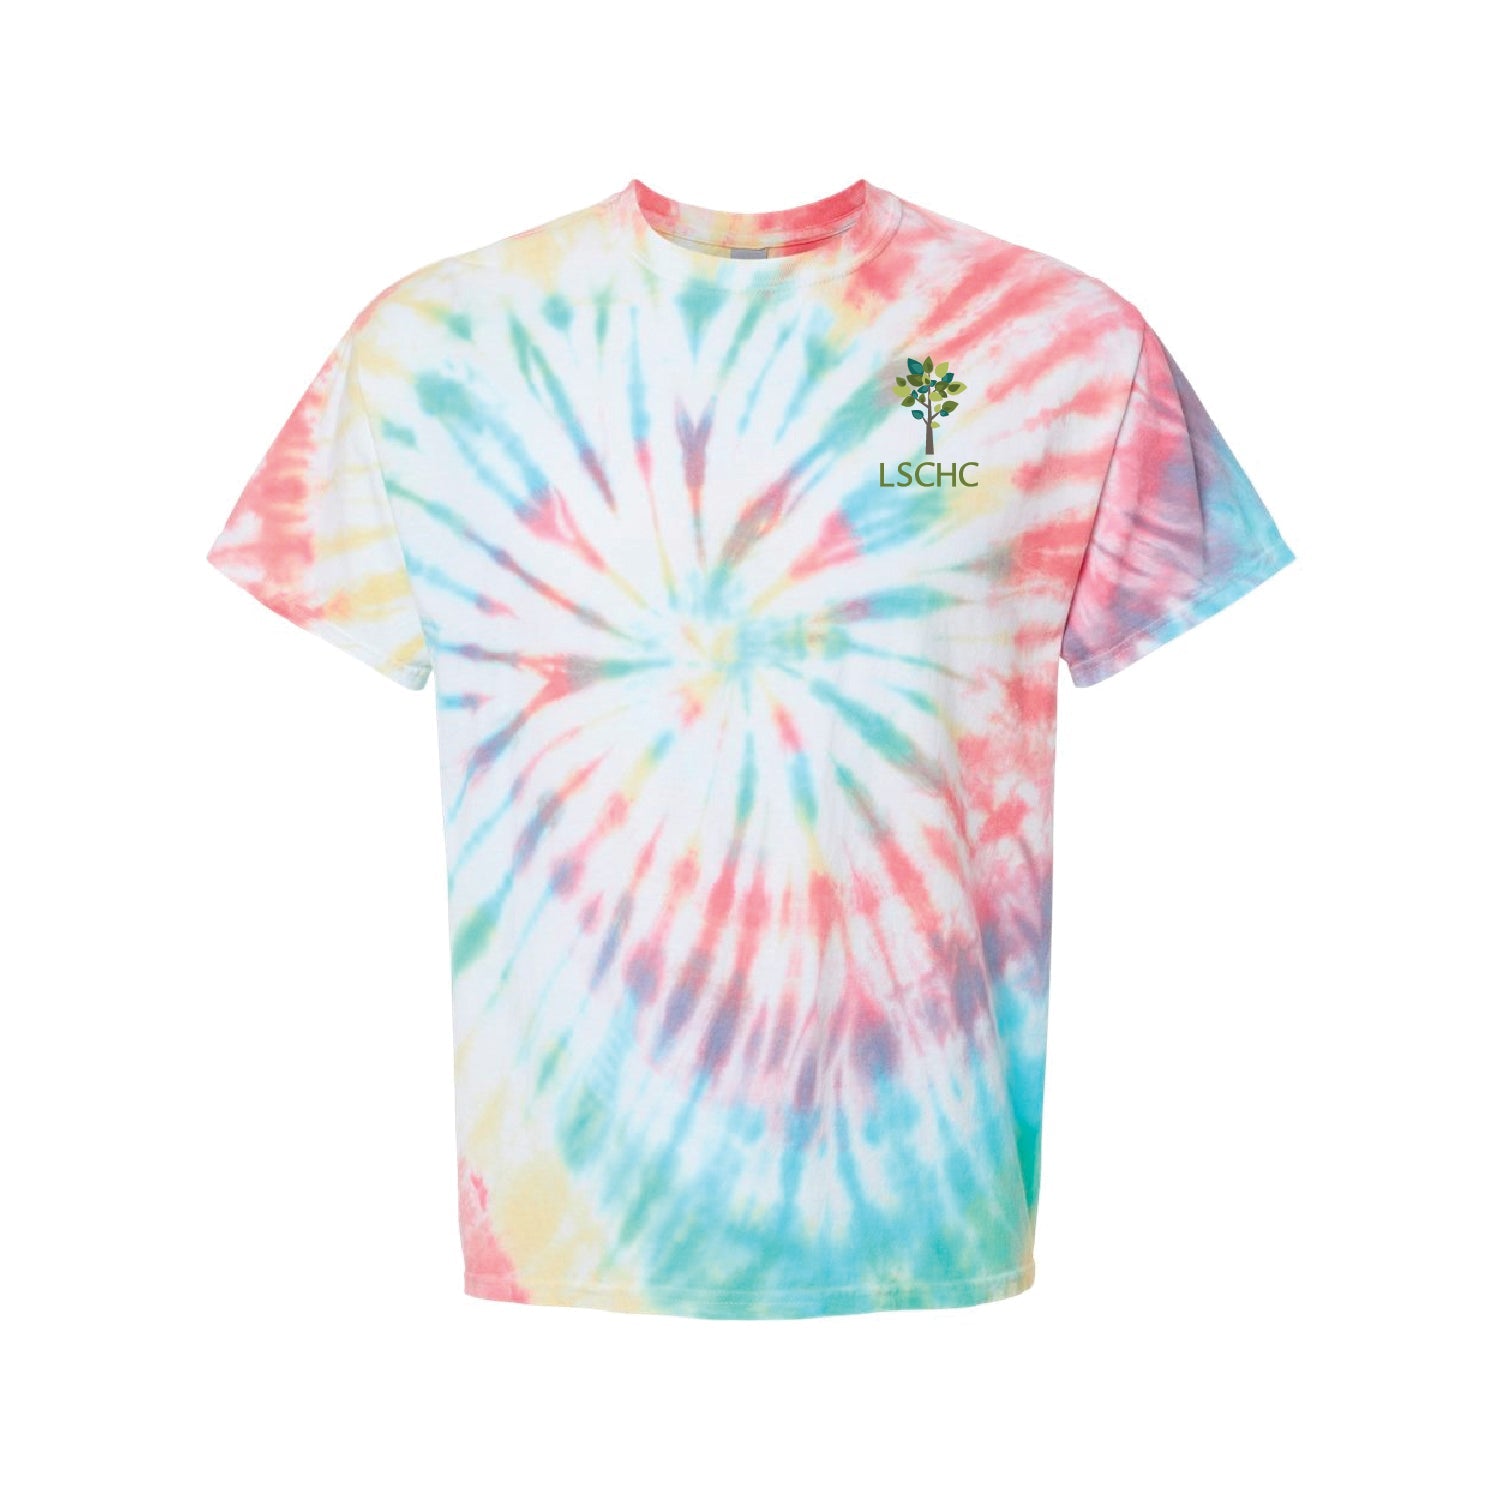 LSCHC Multi-Color Spiral Tie-Dyed T-Shirt - DSP On Demand